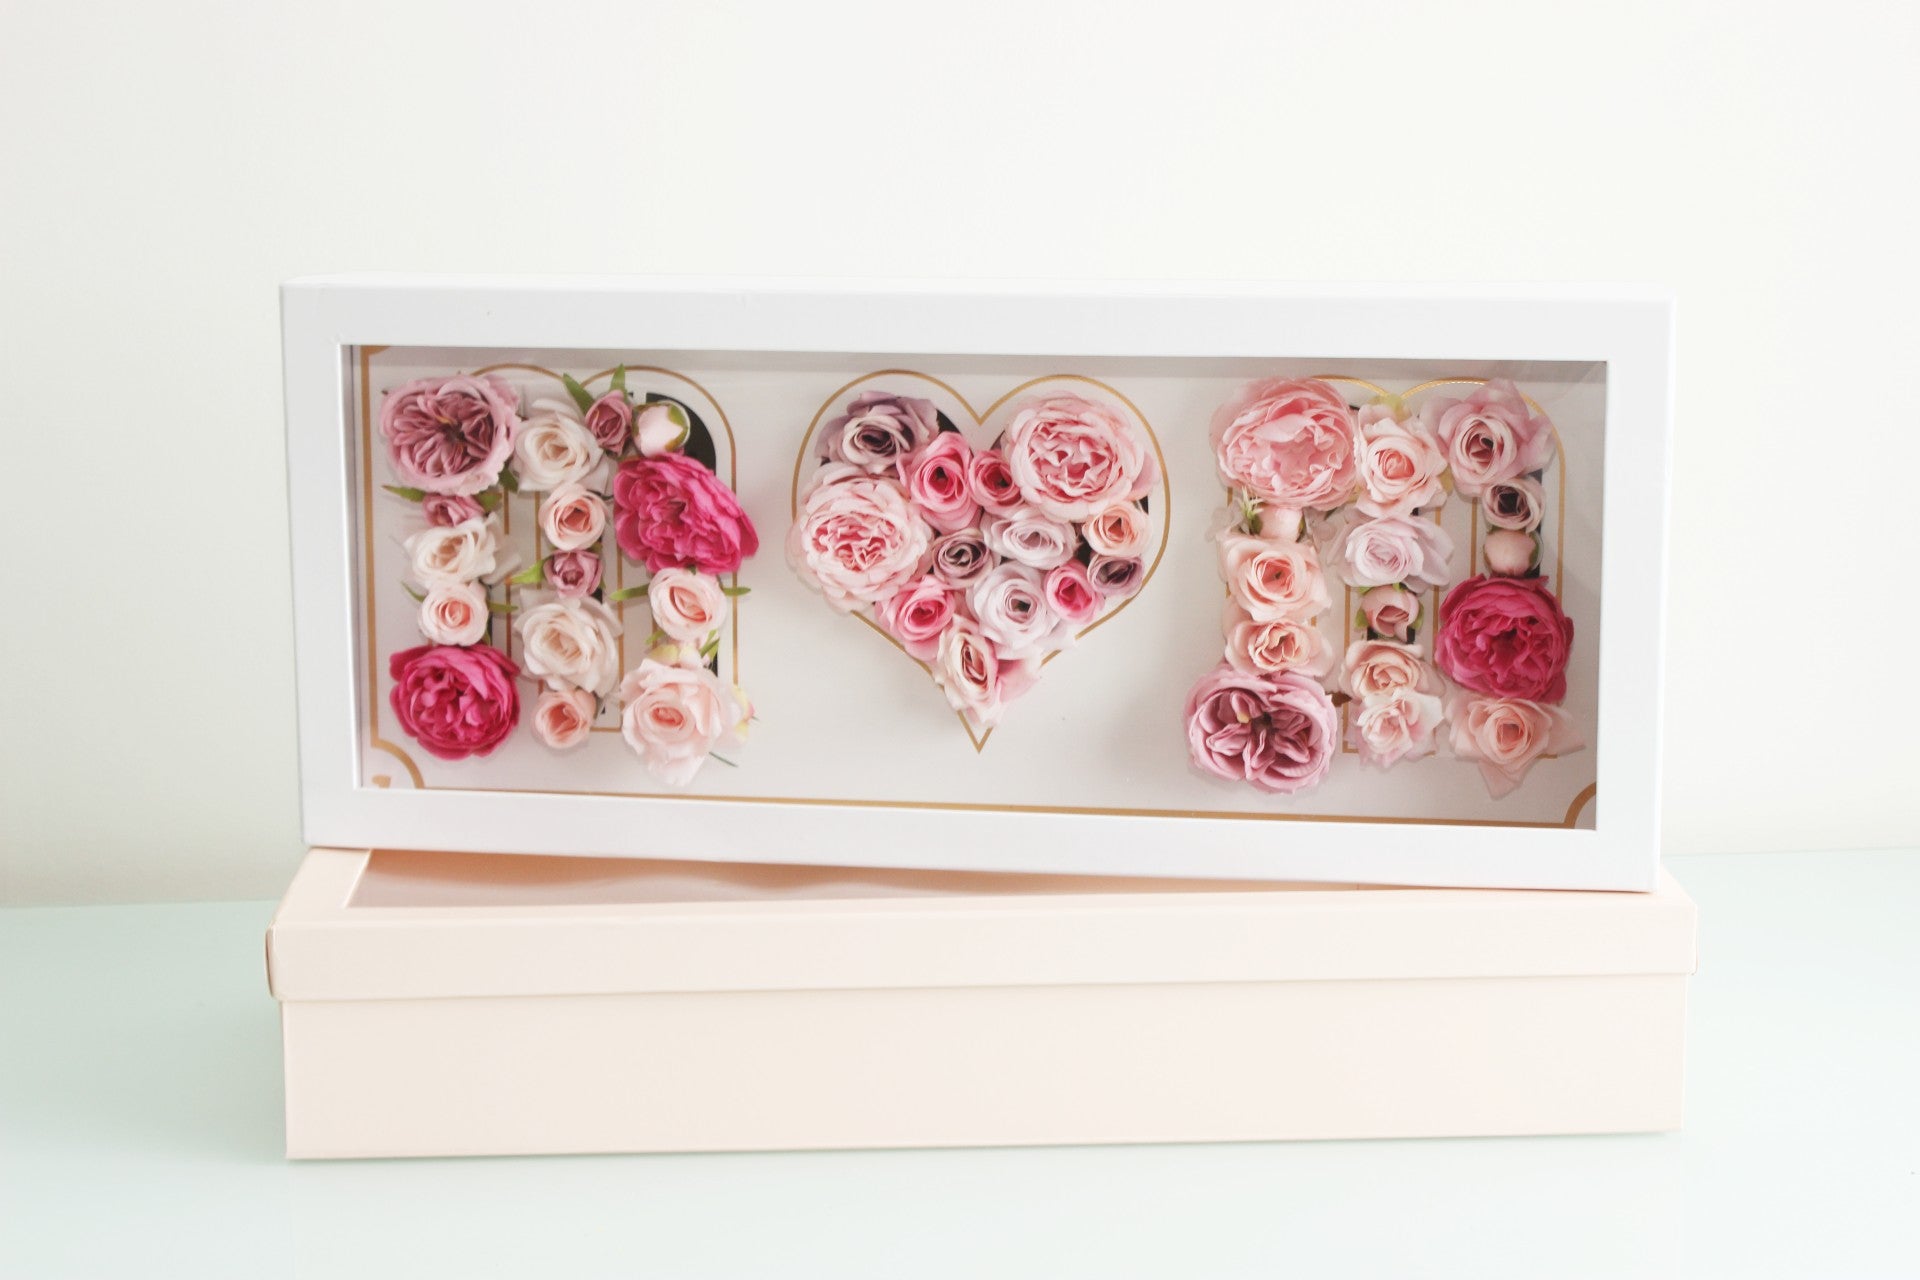 Mother's Day Gift Box – Milly Loves Ltd